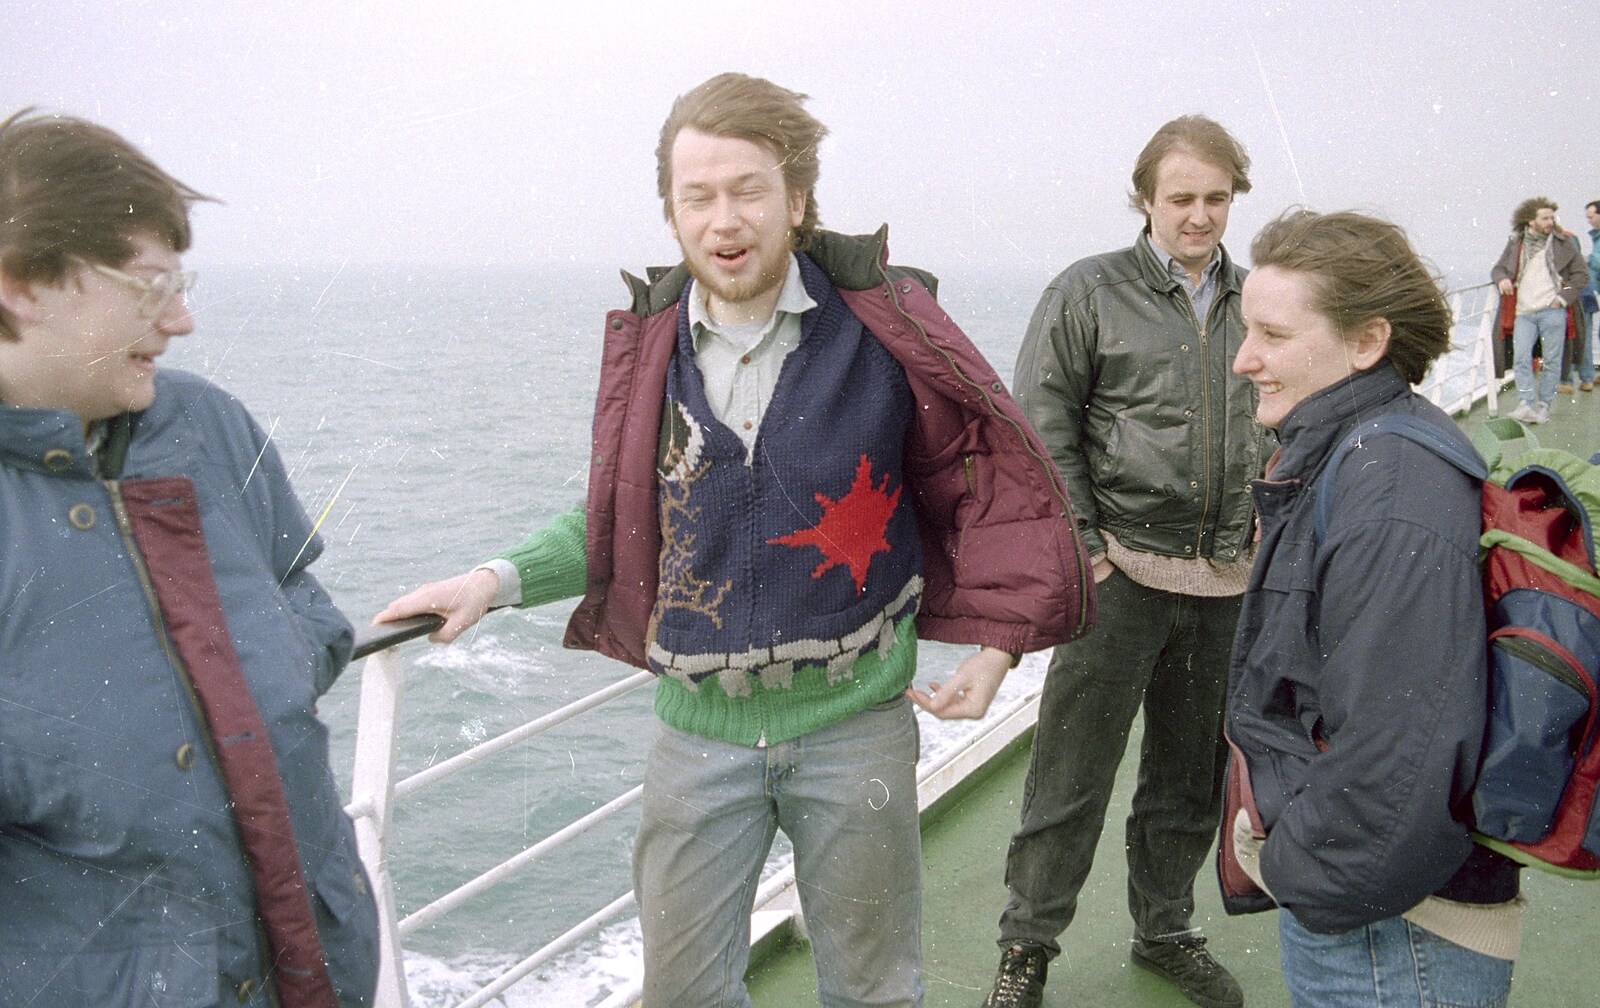 Tone, Nick Booth, Neil and Jo Jennet on the ferry  from A Clays Trip to Calais, and Sorting Out The Garden, Suffolk - 18th May 1994